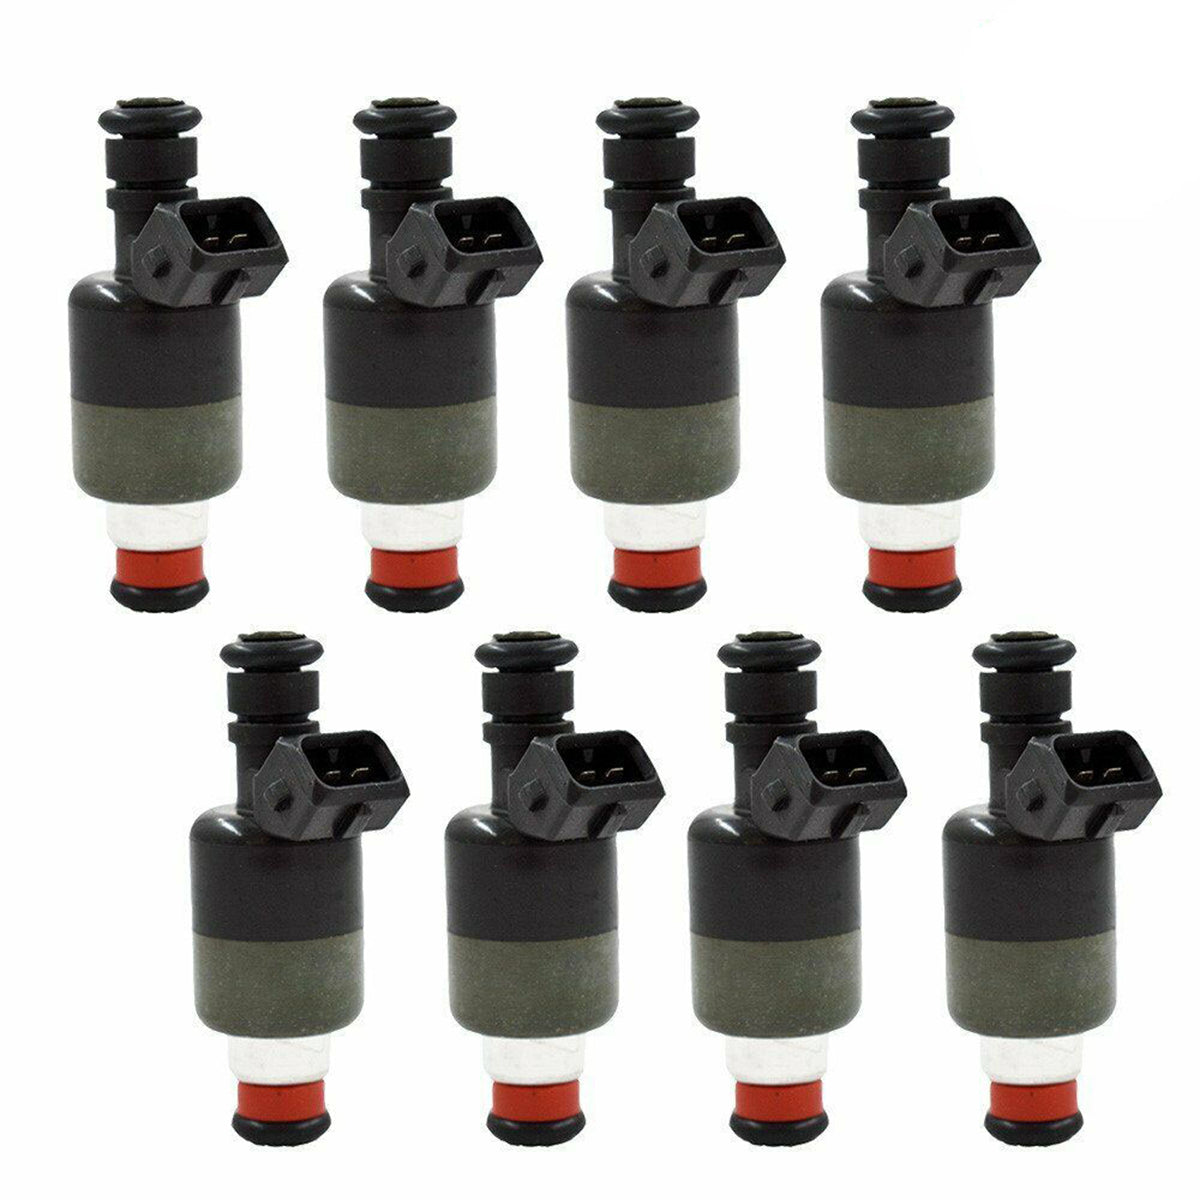 Rochester Fuel Injector 17095004 for 1994-1997 Chevrolet Buick Pontiac Cadillac, Car Fuel Injector, Daysyore Fuel Injector